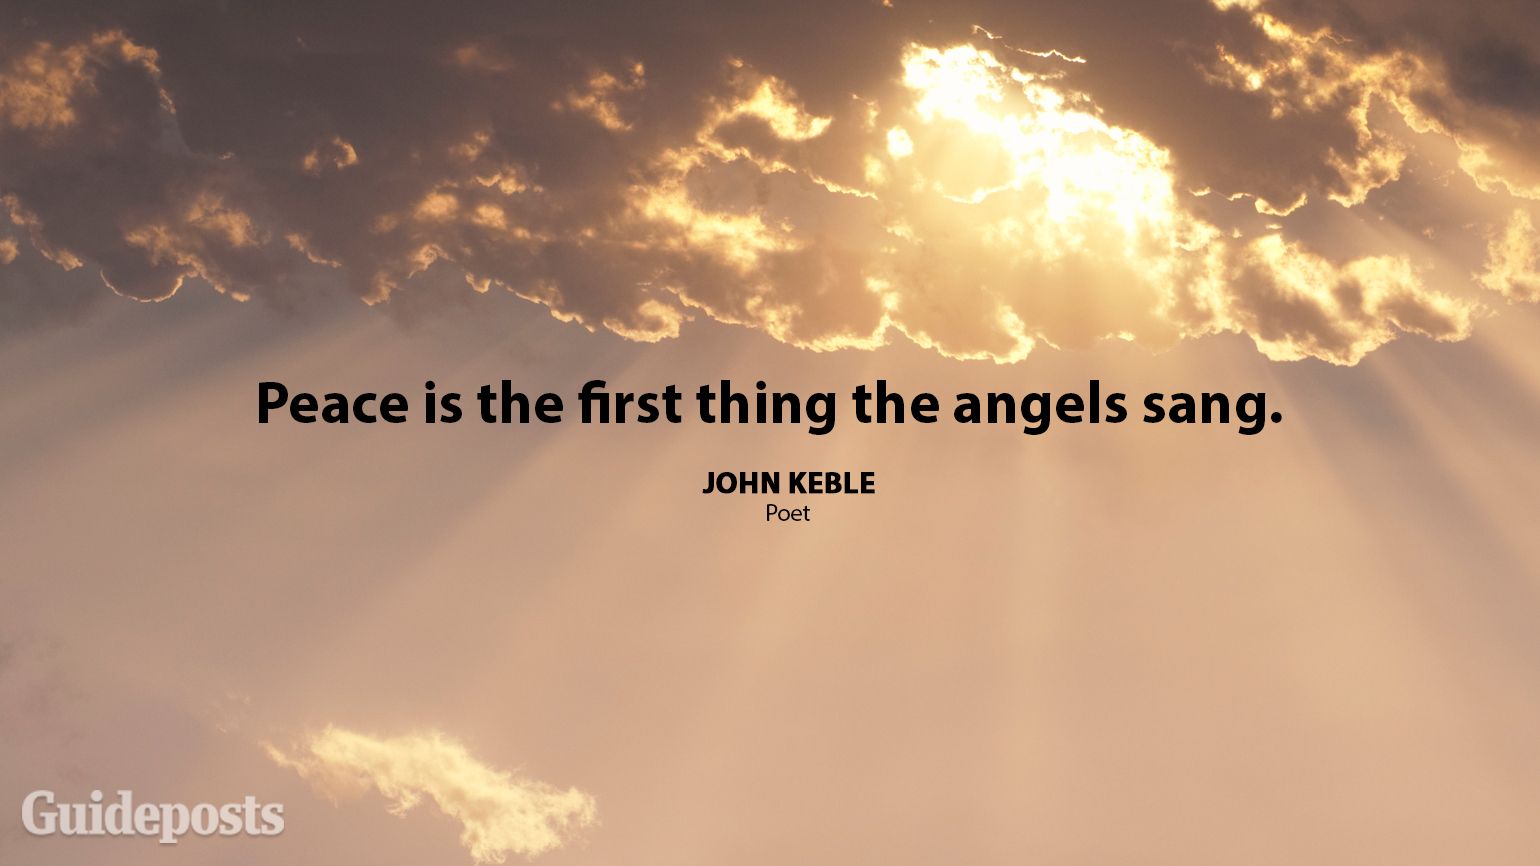 Peace is the first thing the angels sang